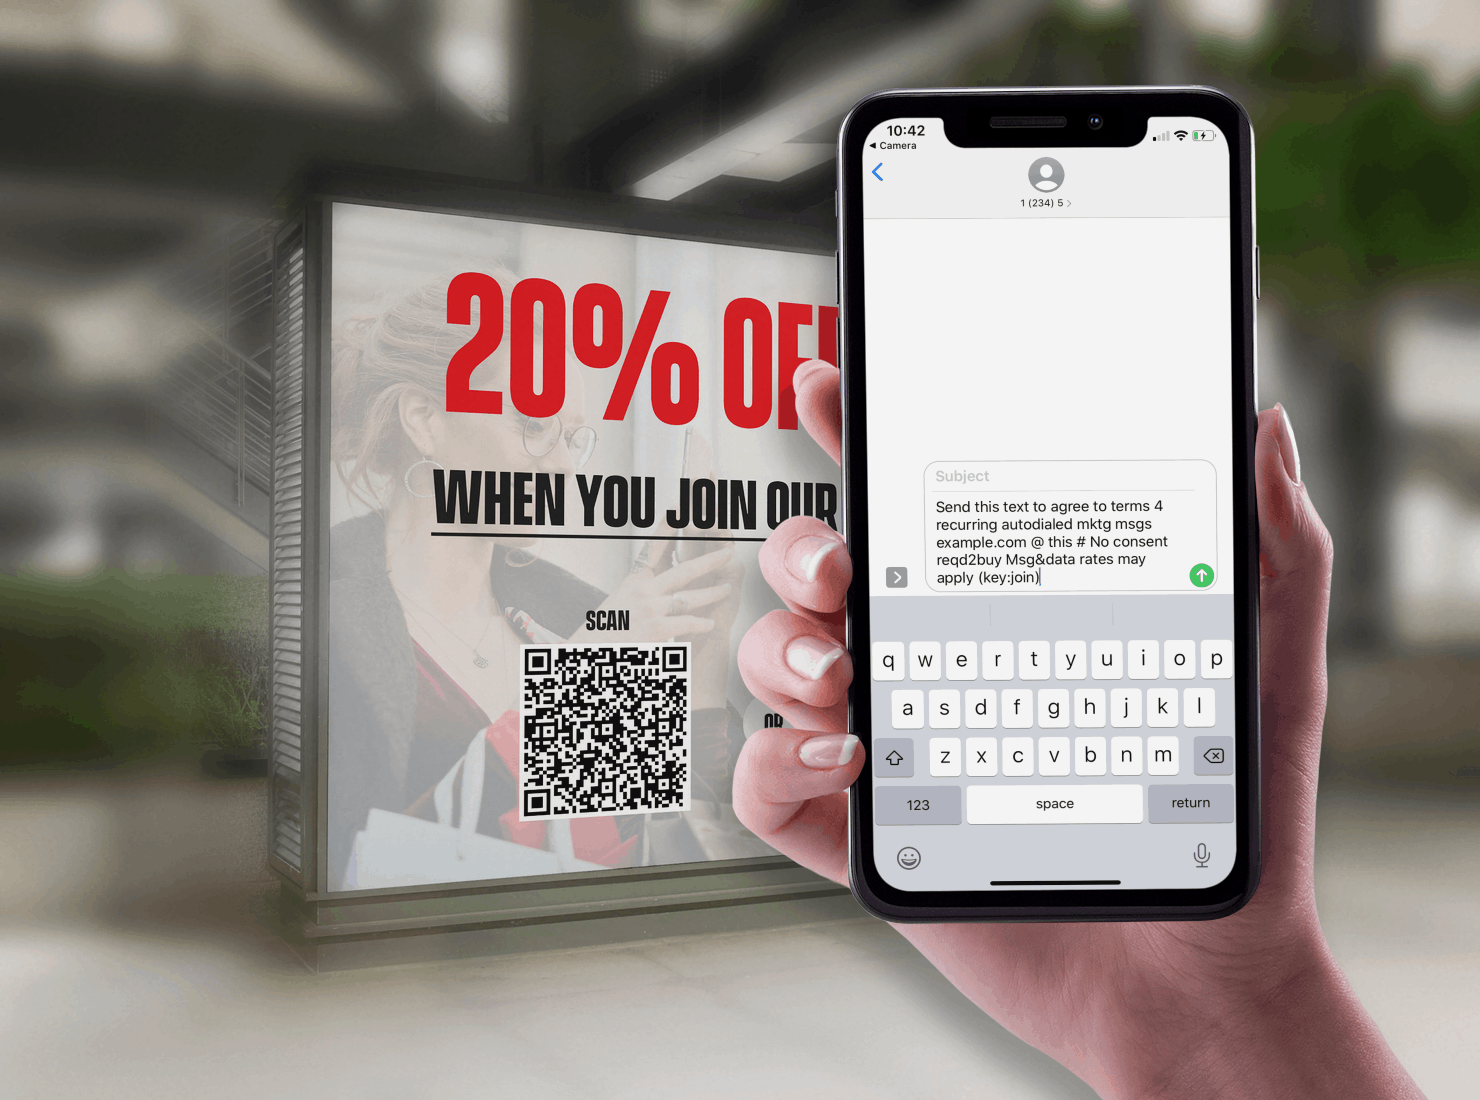 SMS Marketing with QR Codes - Step 4 Compose Opt-In Text Message